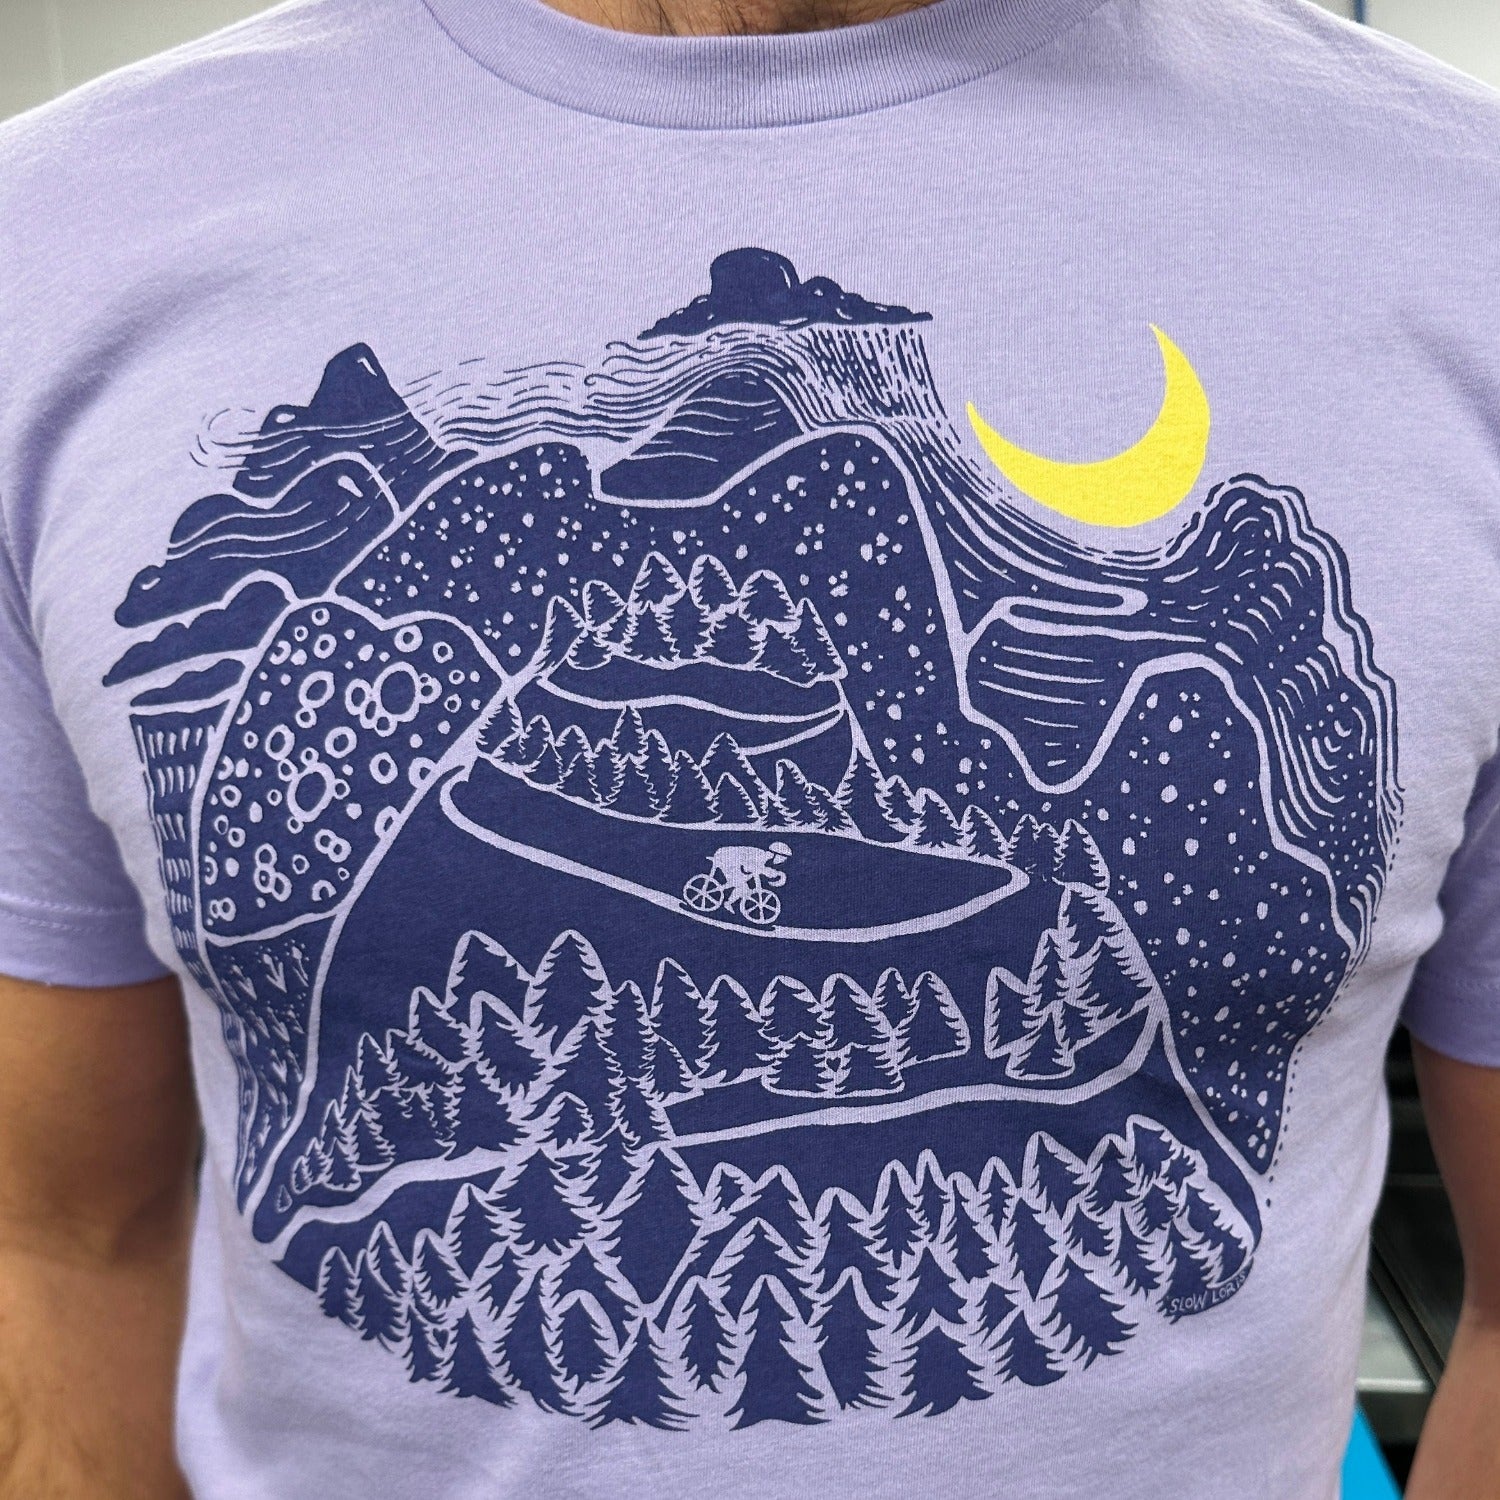 Night Ride print in dark blue ink. Mountain scene with raincloud, crescent moon, and bicyclist riding down the mountain